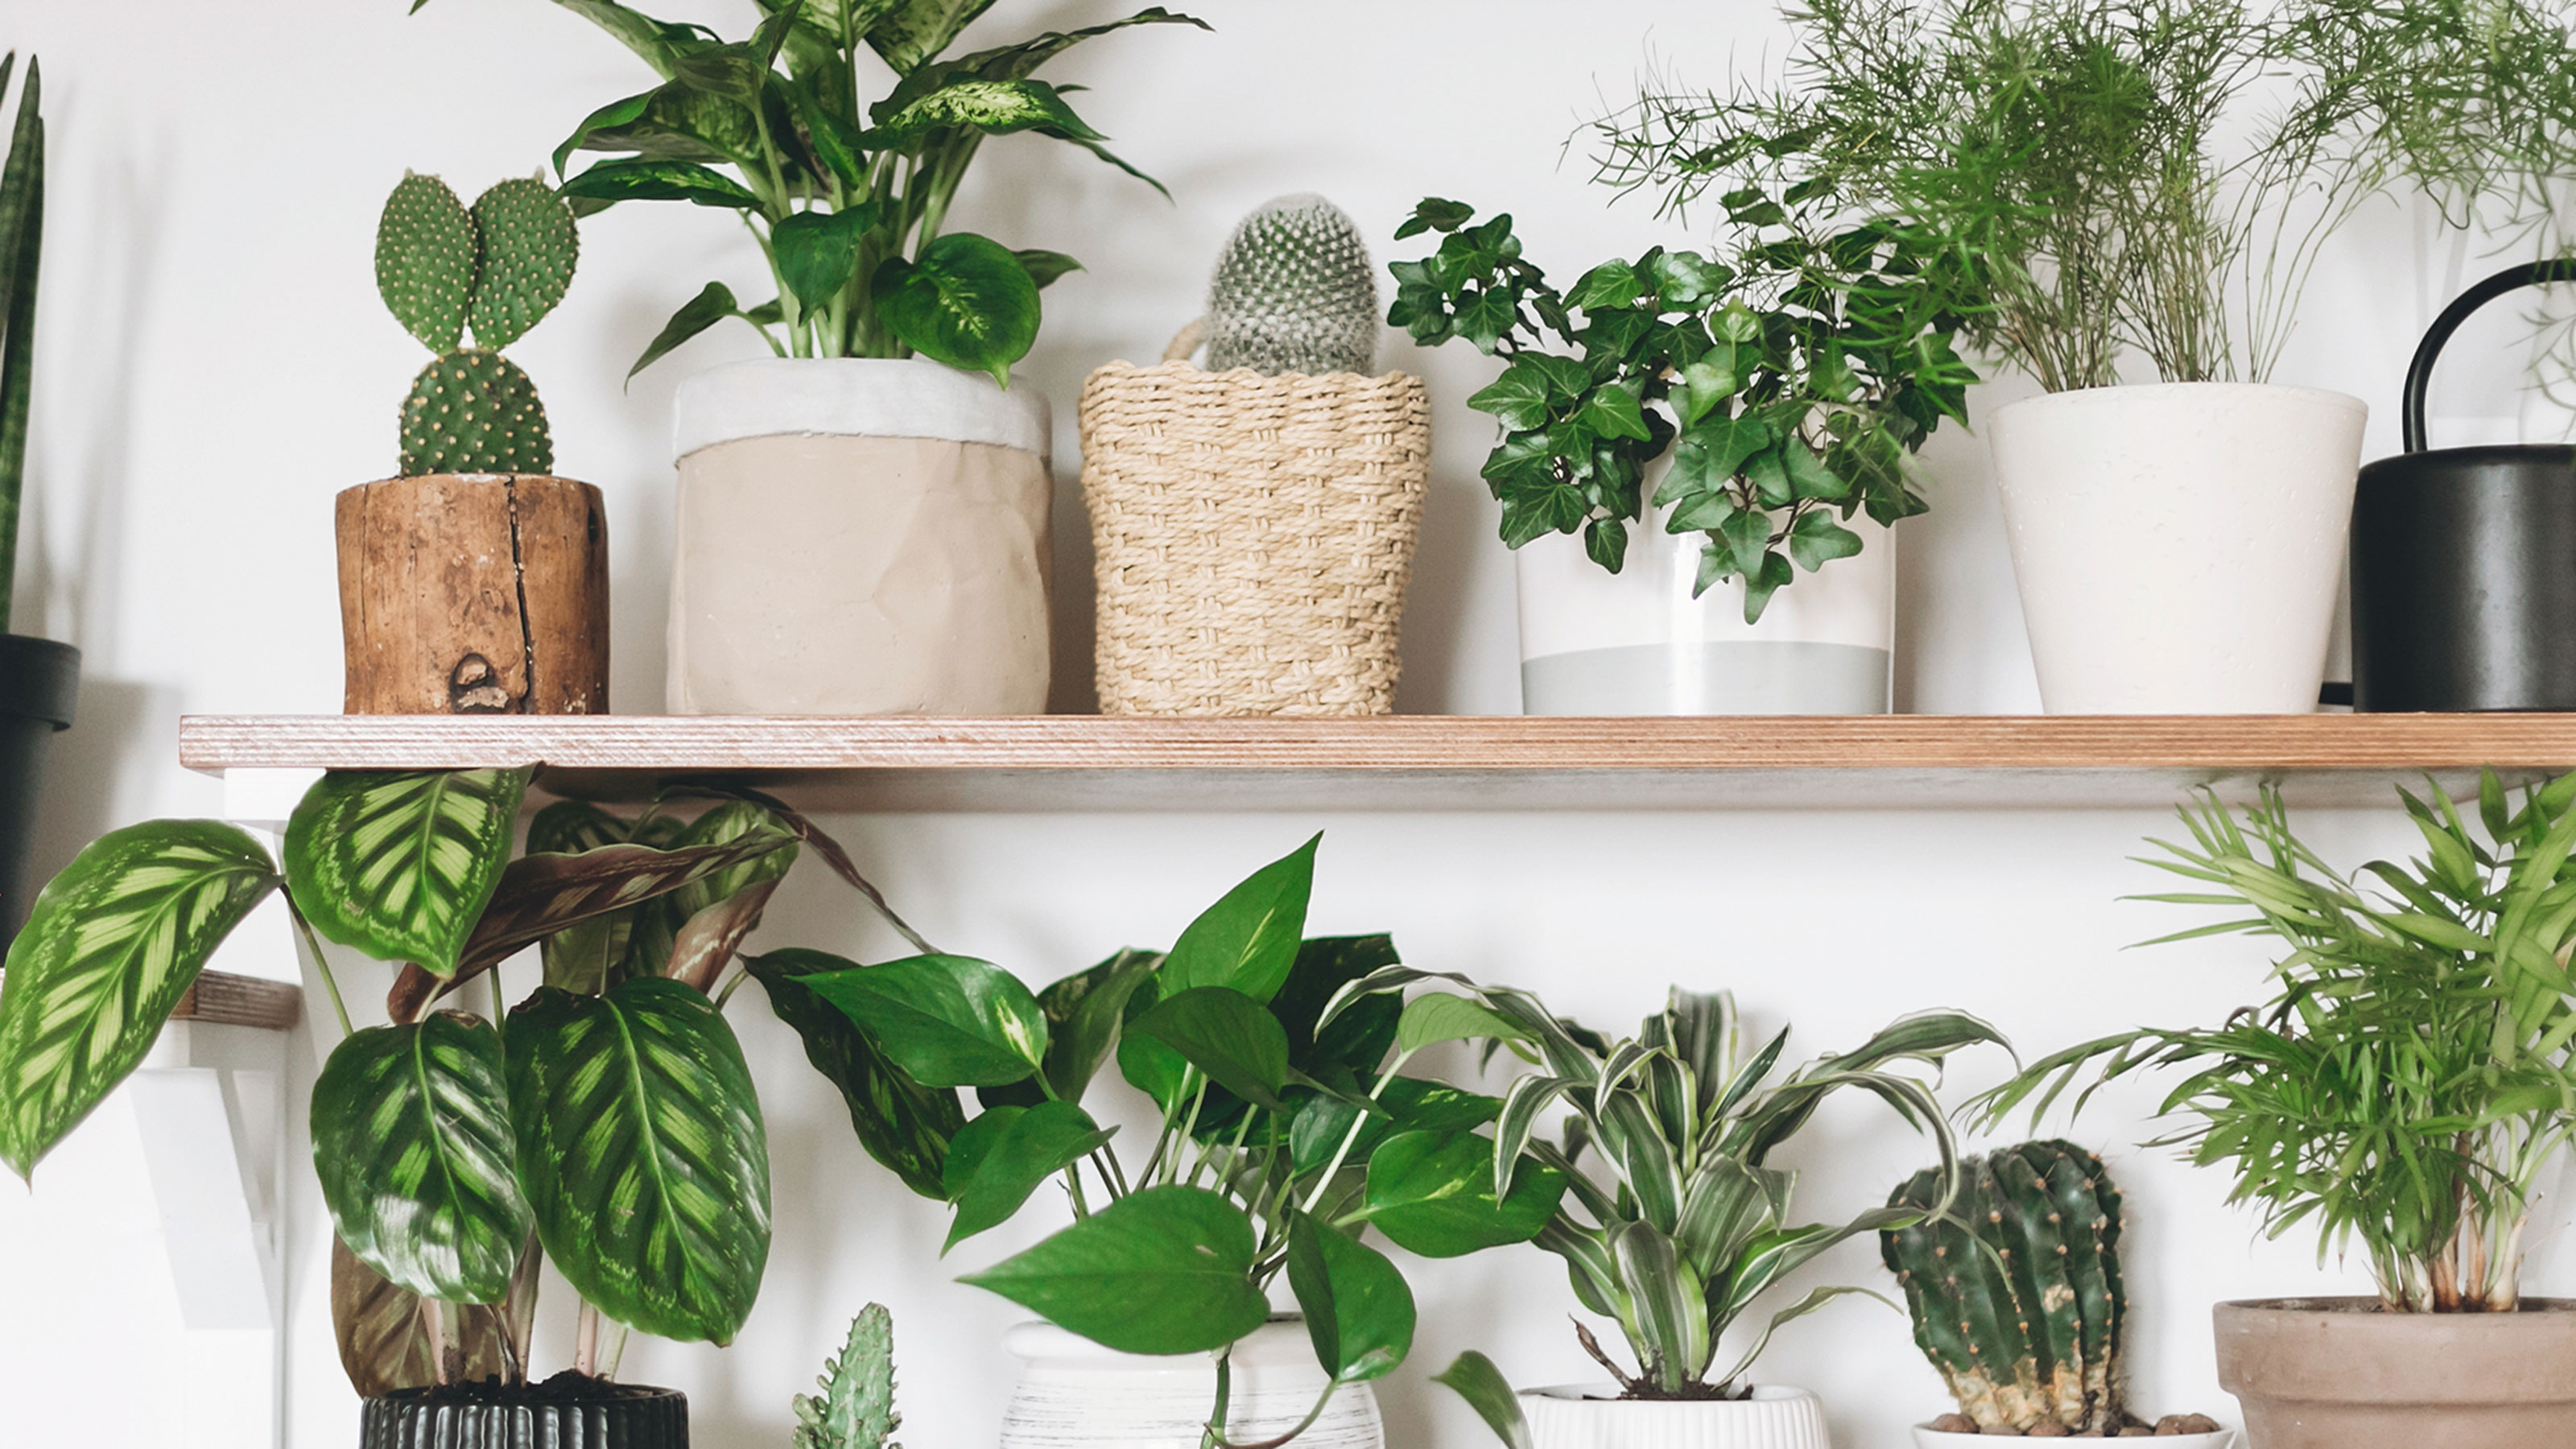 21 low light indoor plants for shady spots in your home   GardeningEtc